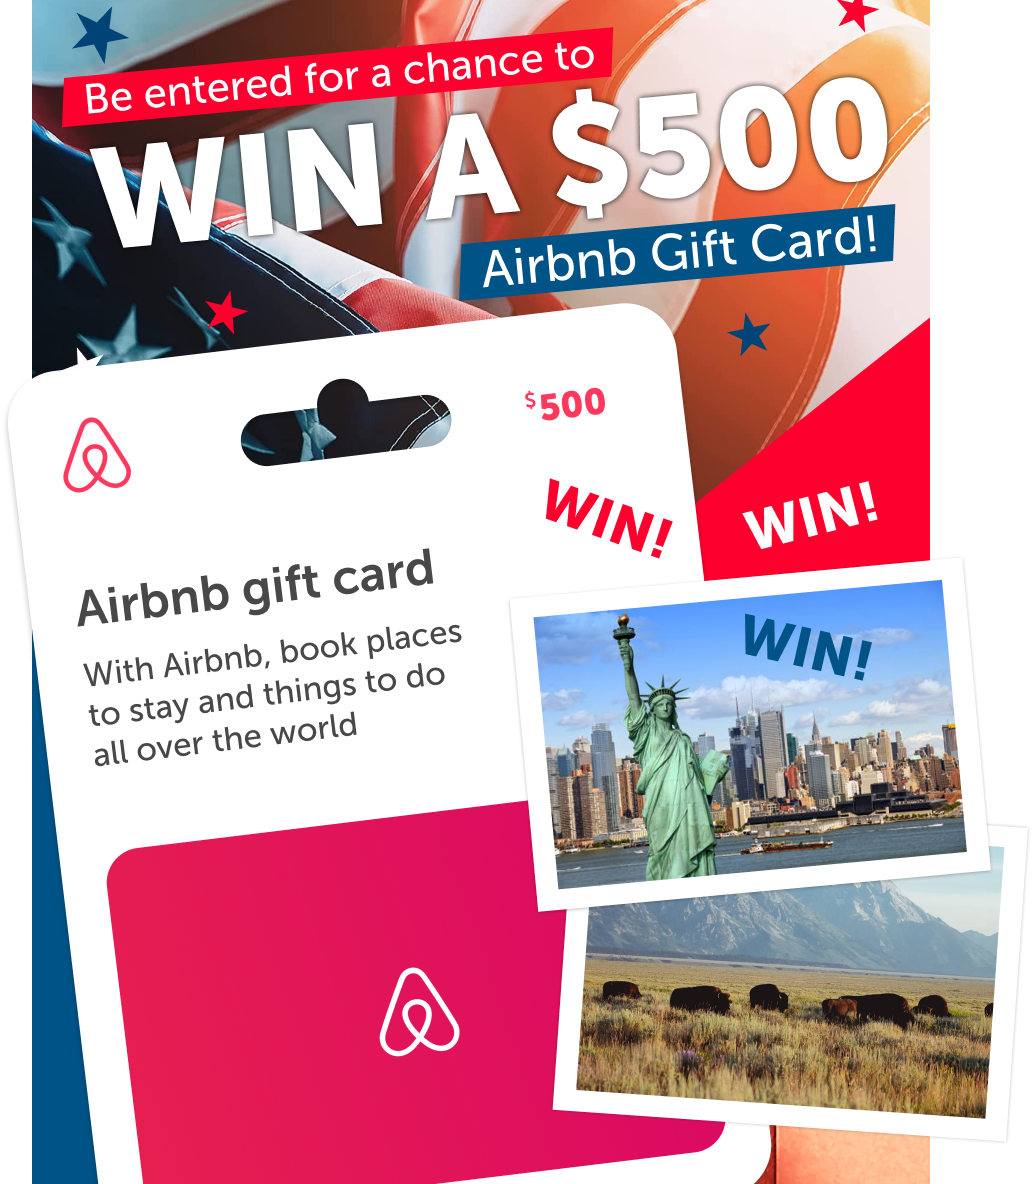 Win a $500 Airbnb Gift Card